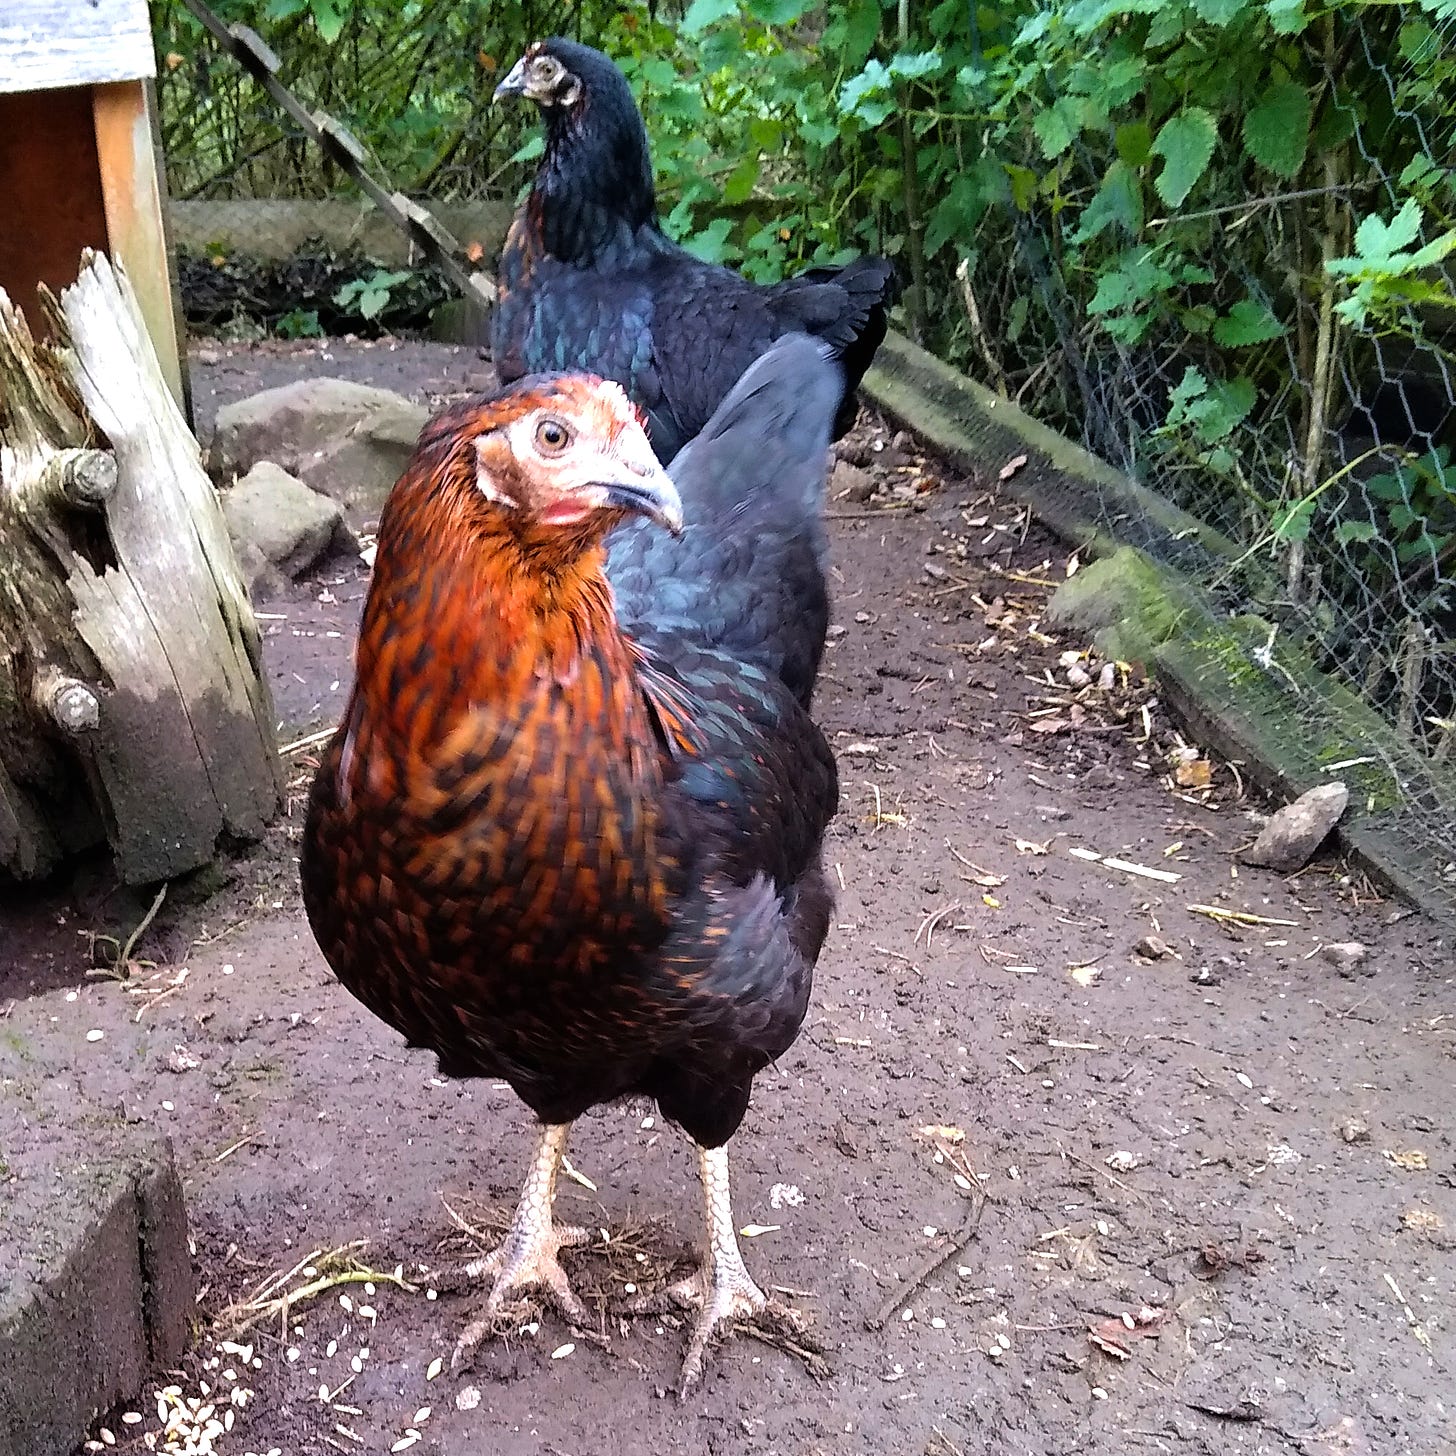 A photograph of two blackrock hens